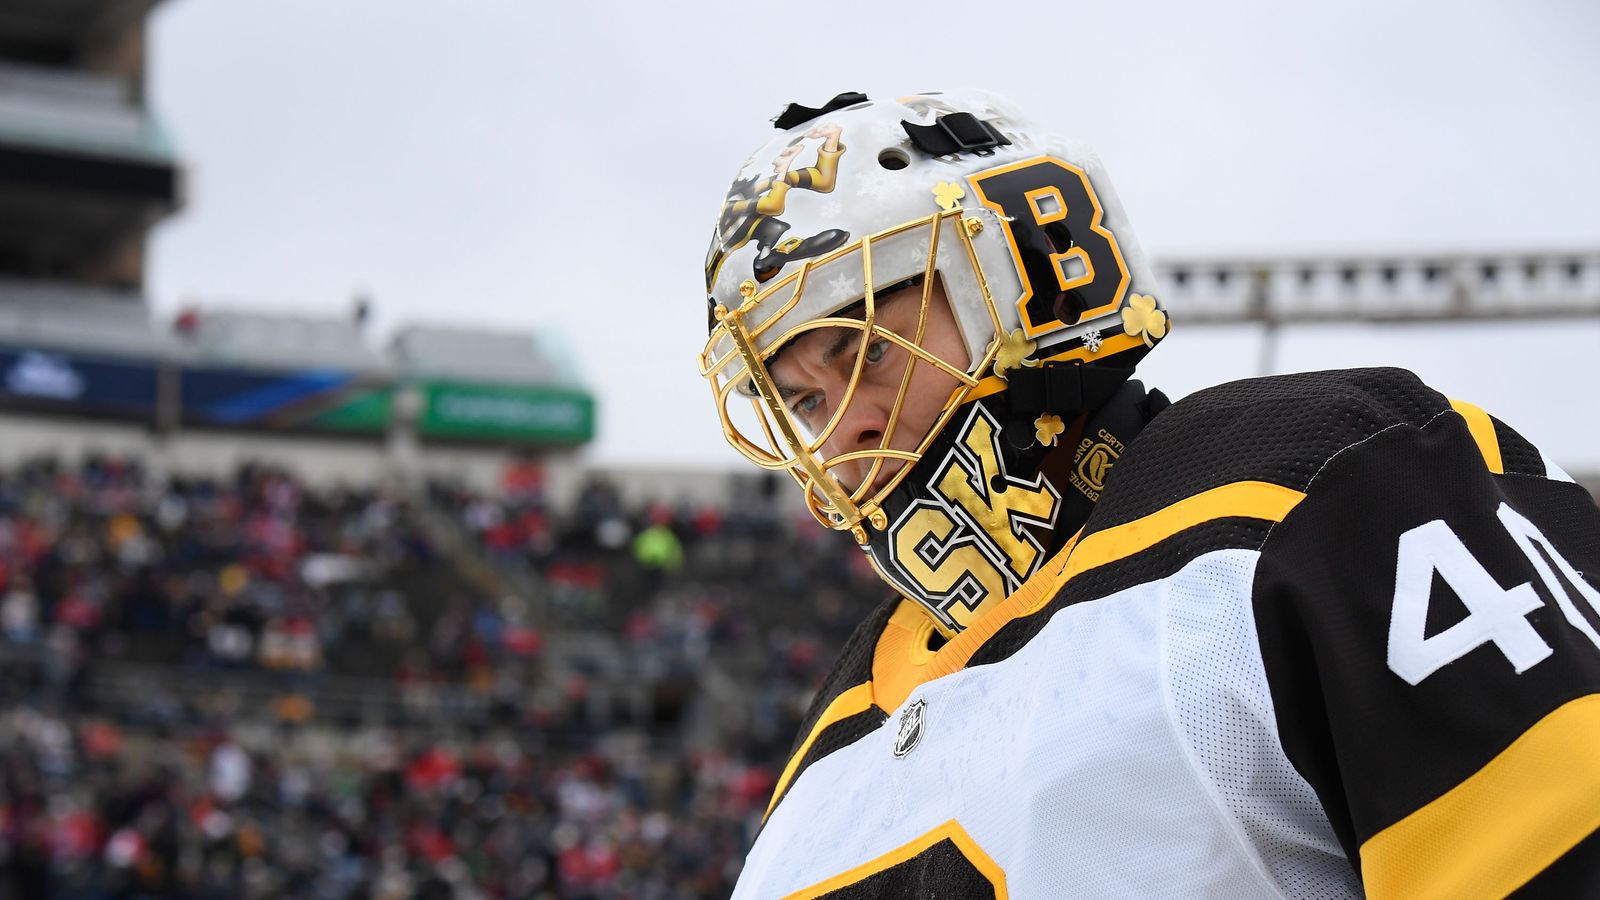 McAvoy cherishes 'Winter Classic' experience